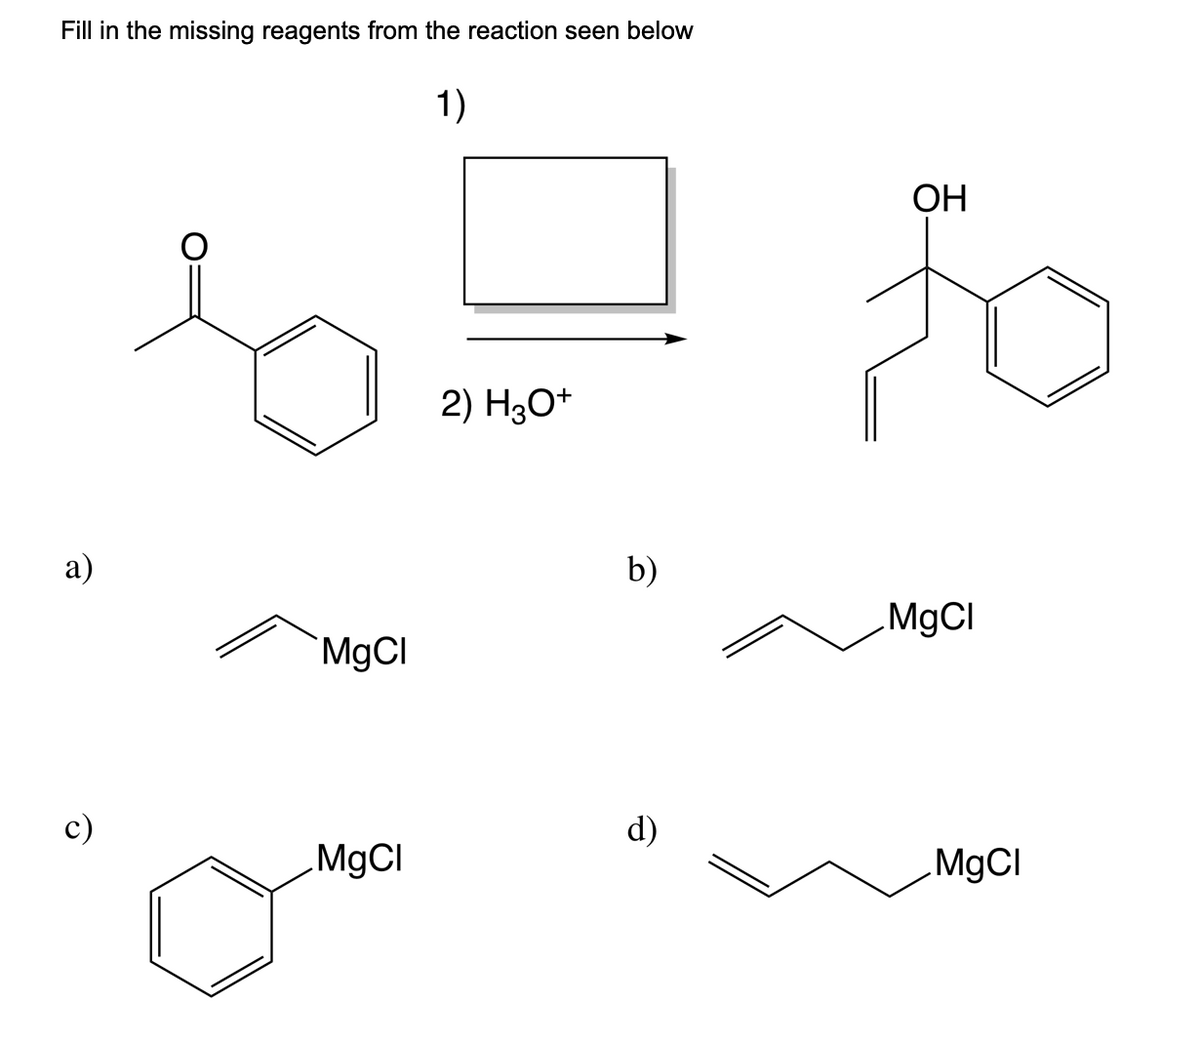 Fill in the missing reagents from the reaction seen below
1)
a)
c)
MgCl
MgCl
2) H3O+
b)
OH
MgCl
MgCl